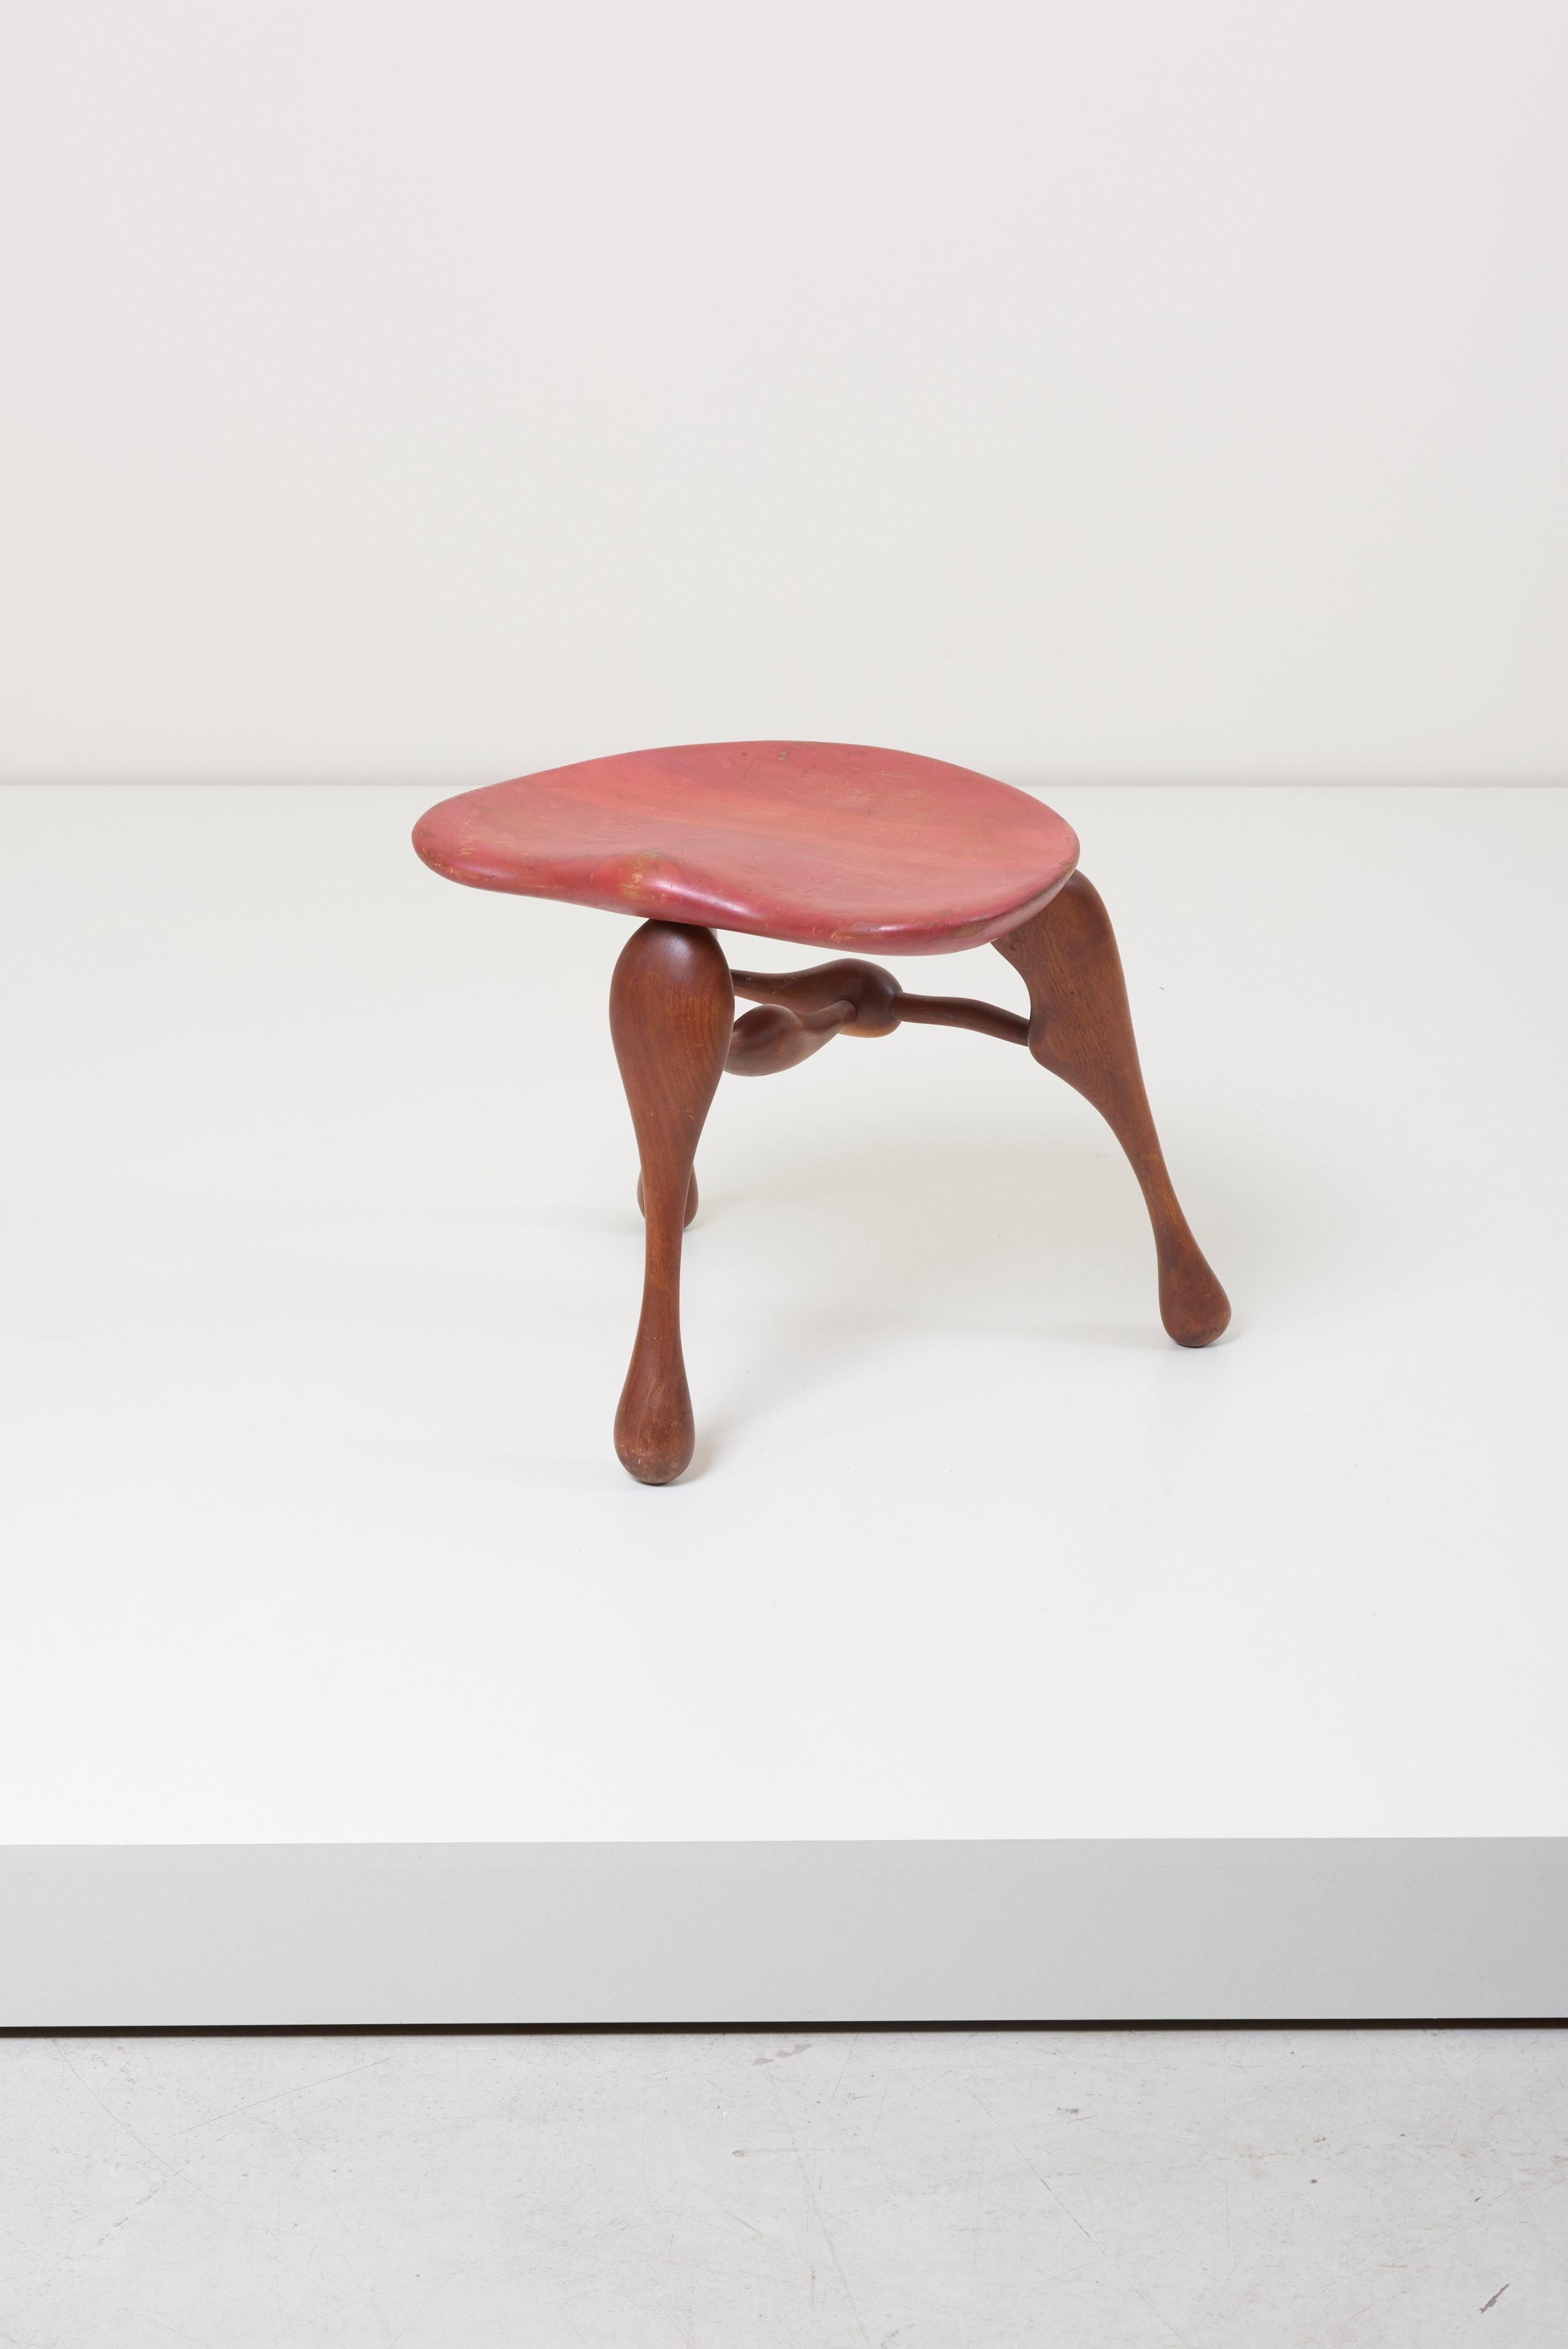 Sculptural handcrafted three legged stool by noted studio furniture maker Ron Curtis.